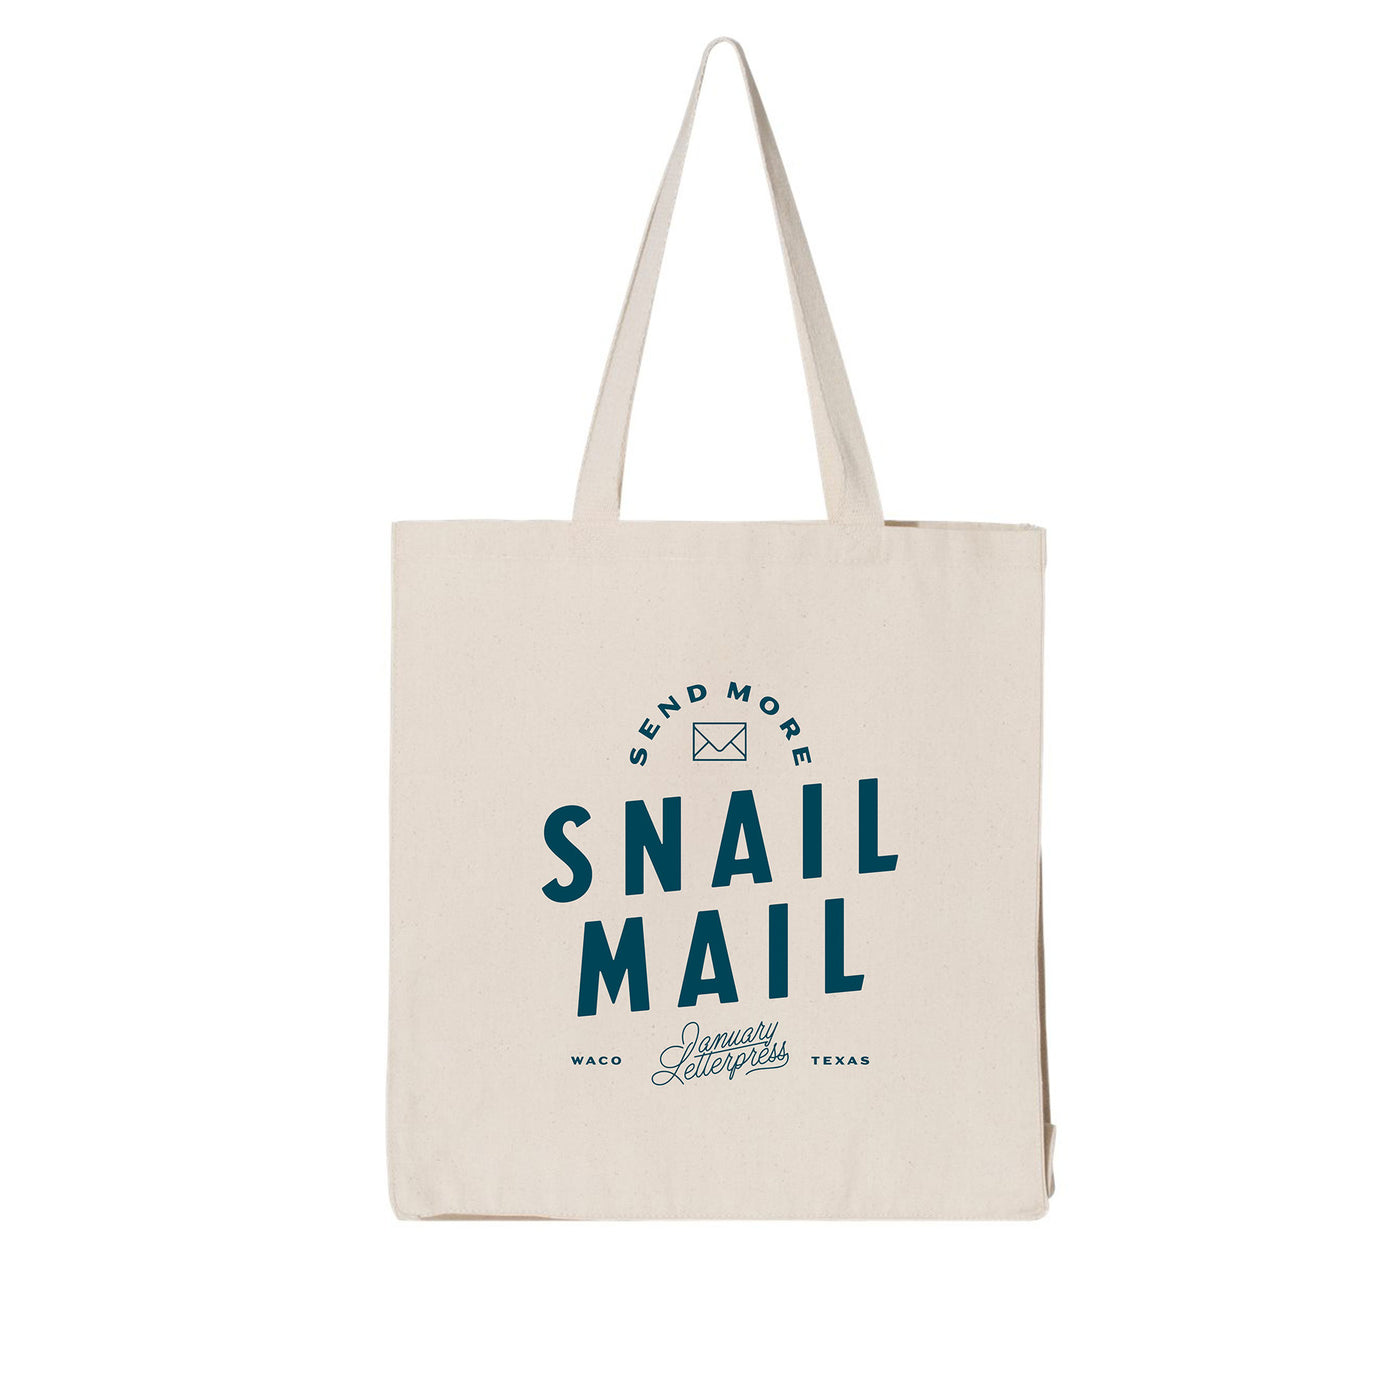 Snail Mail Tote Bag